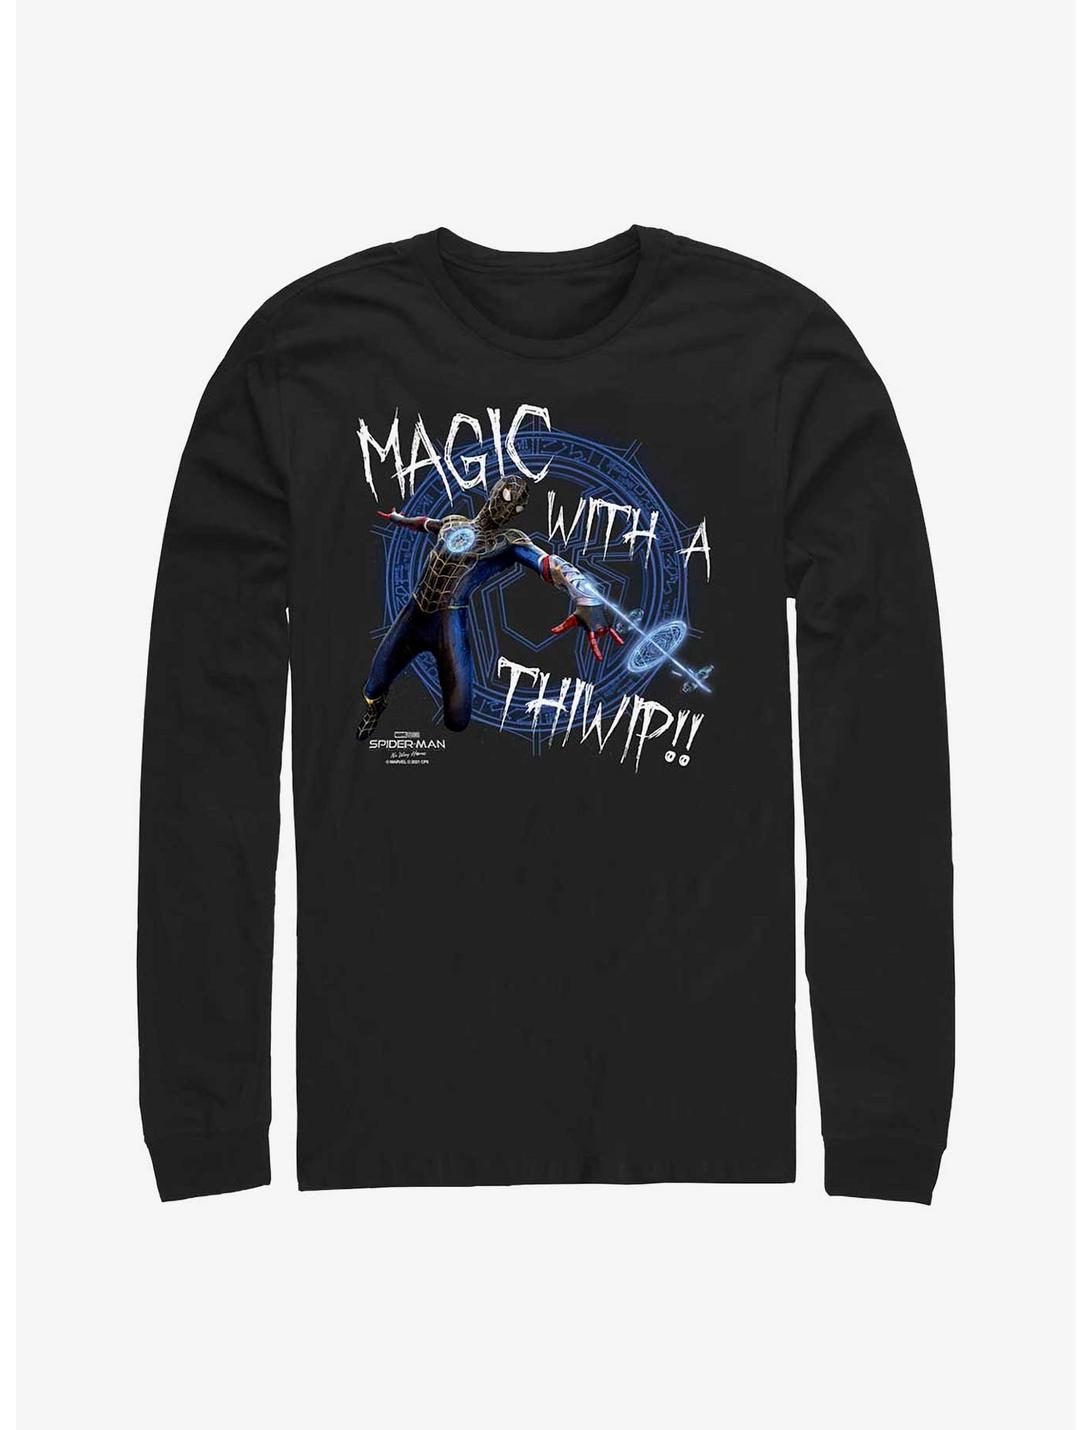 Marvel Spider-Man: No Way Home Magic With A Thwip Long-Sleeve T-Shirt, BLACK, hi-res